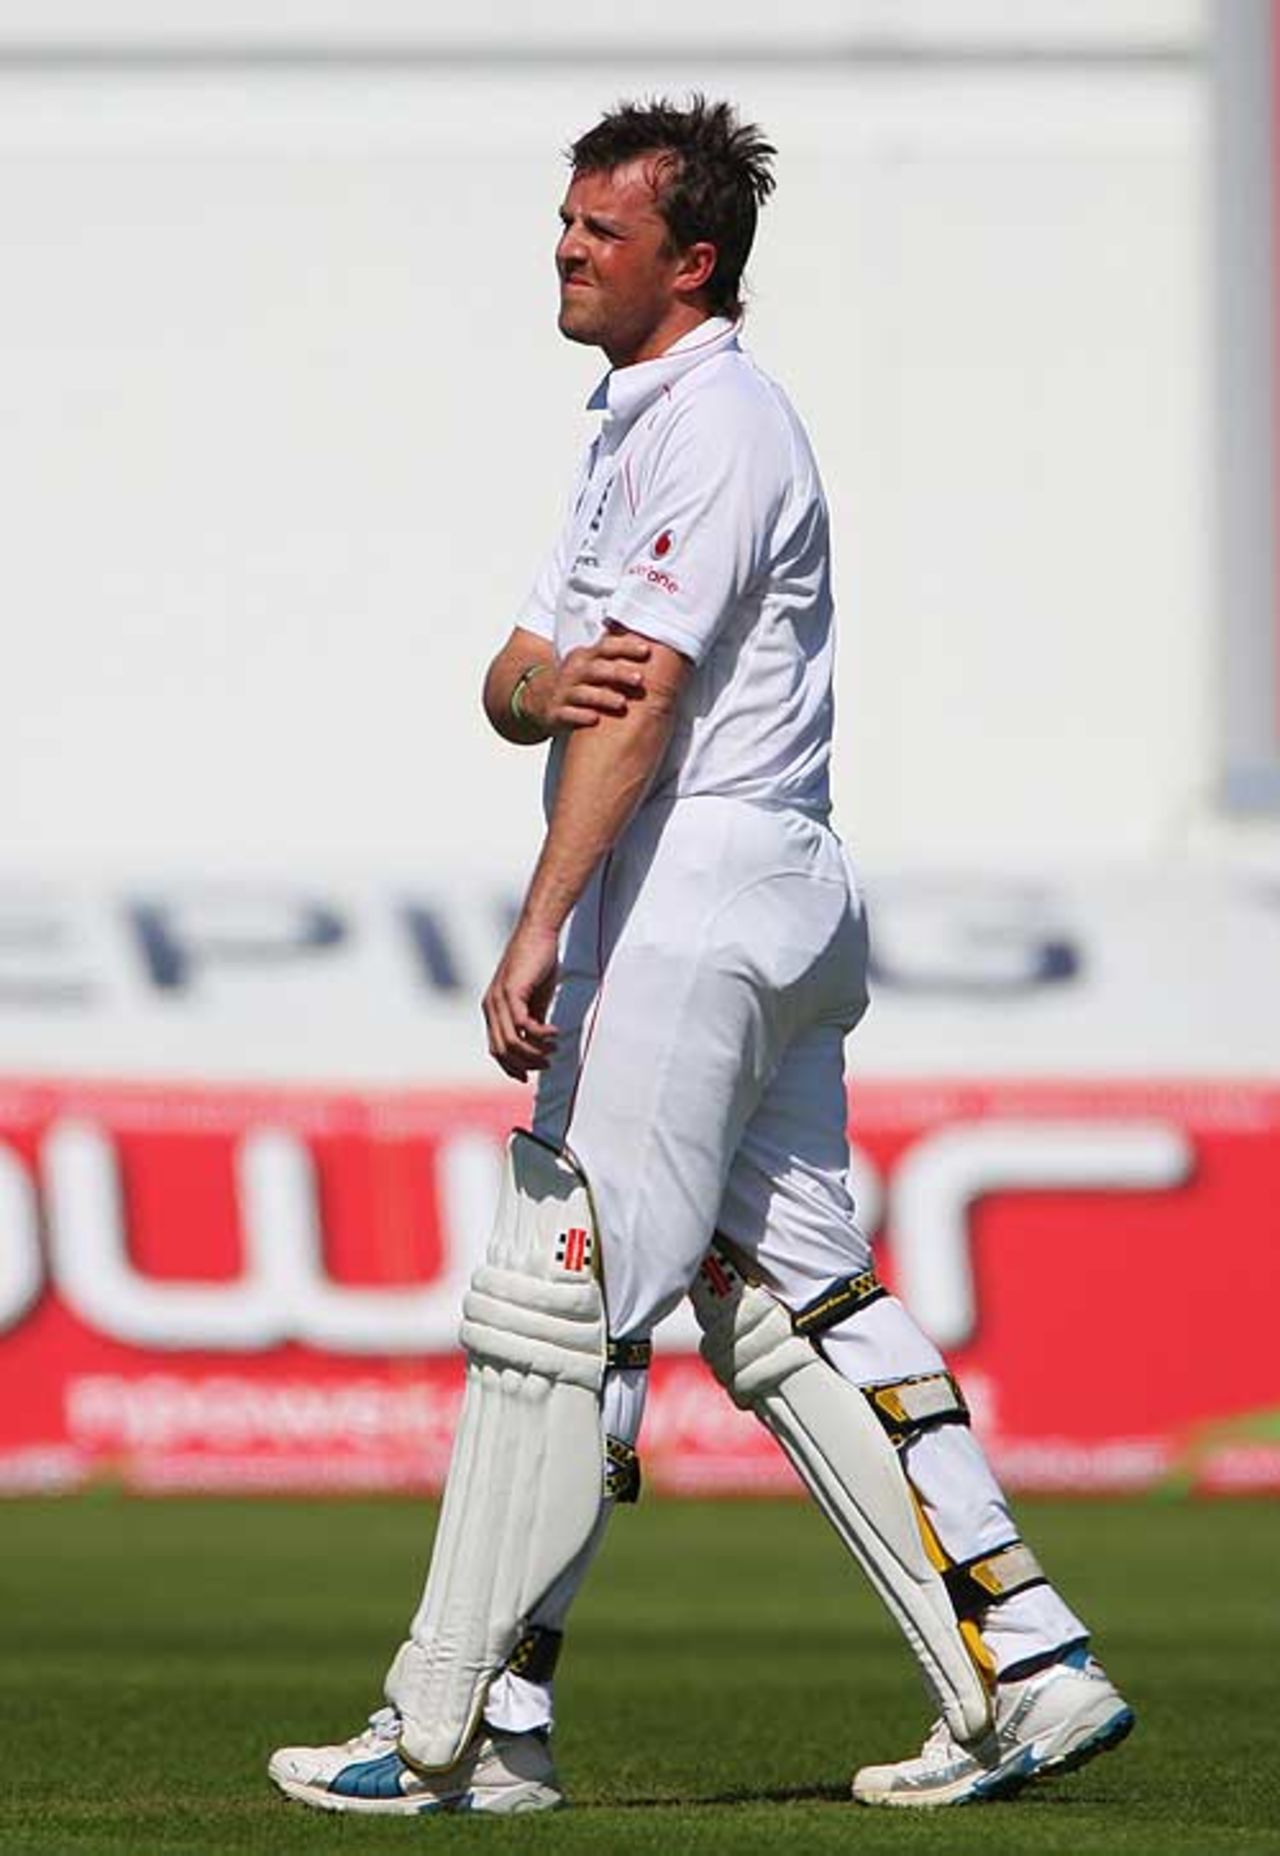 Graeme Swann takes time out after copping another blow, England v Australia, 1st Test, Cardiff, 5th day, July 12, 2009